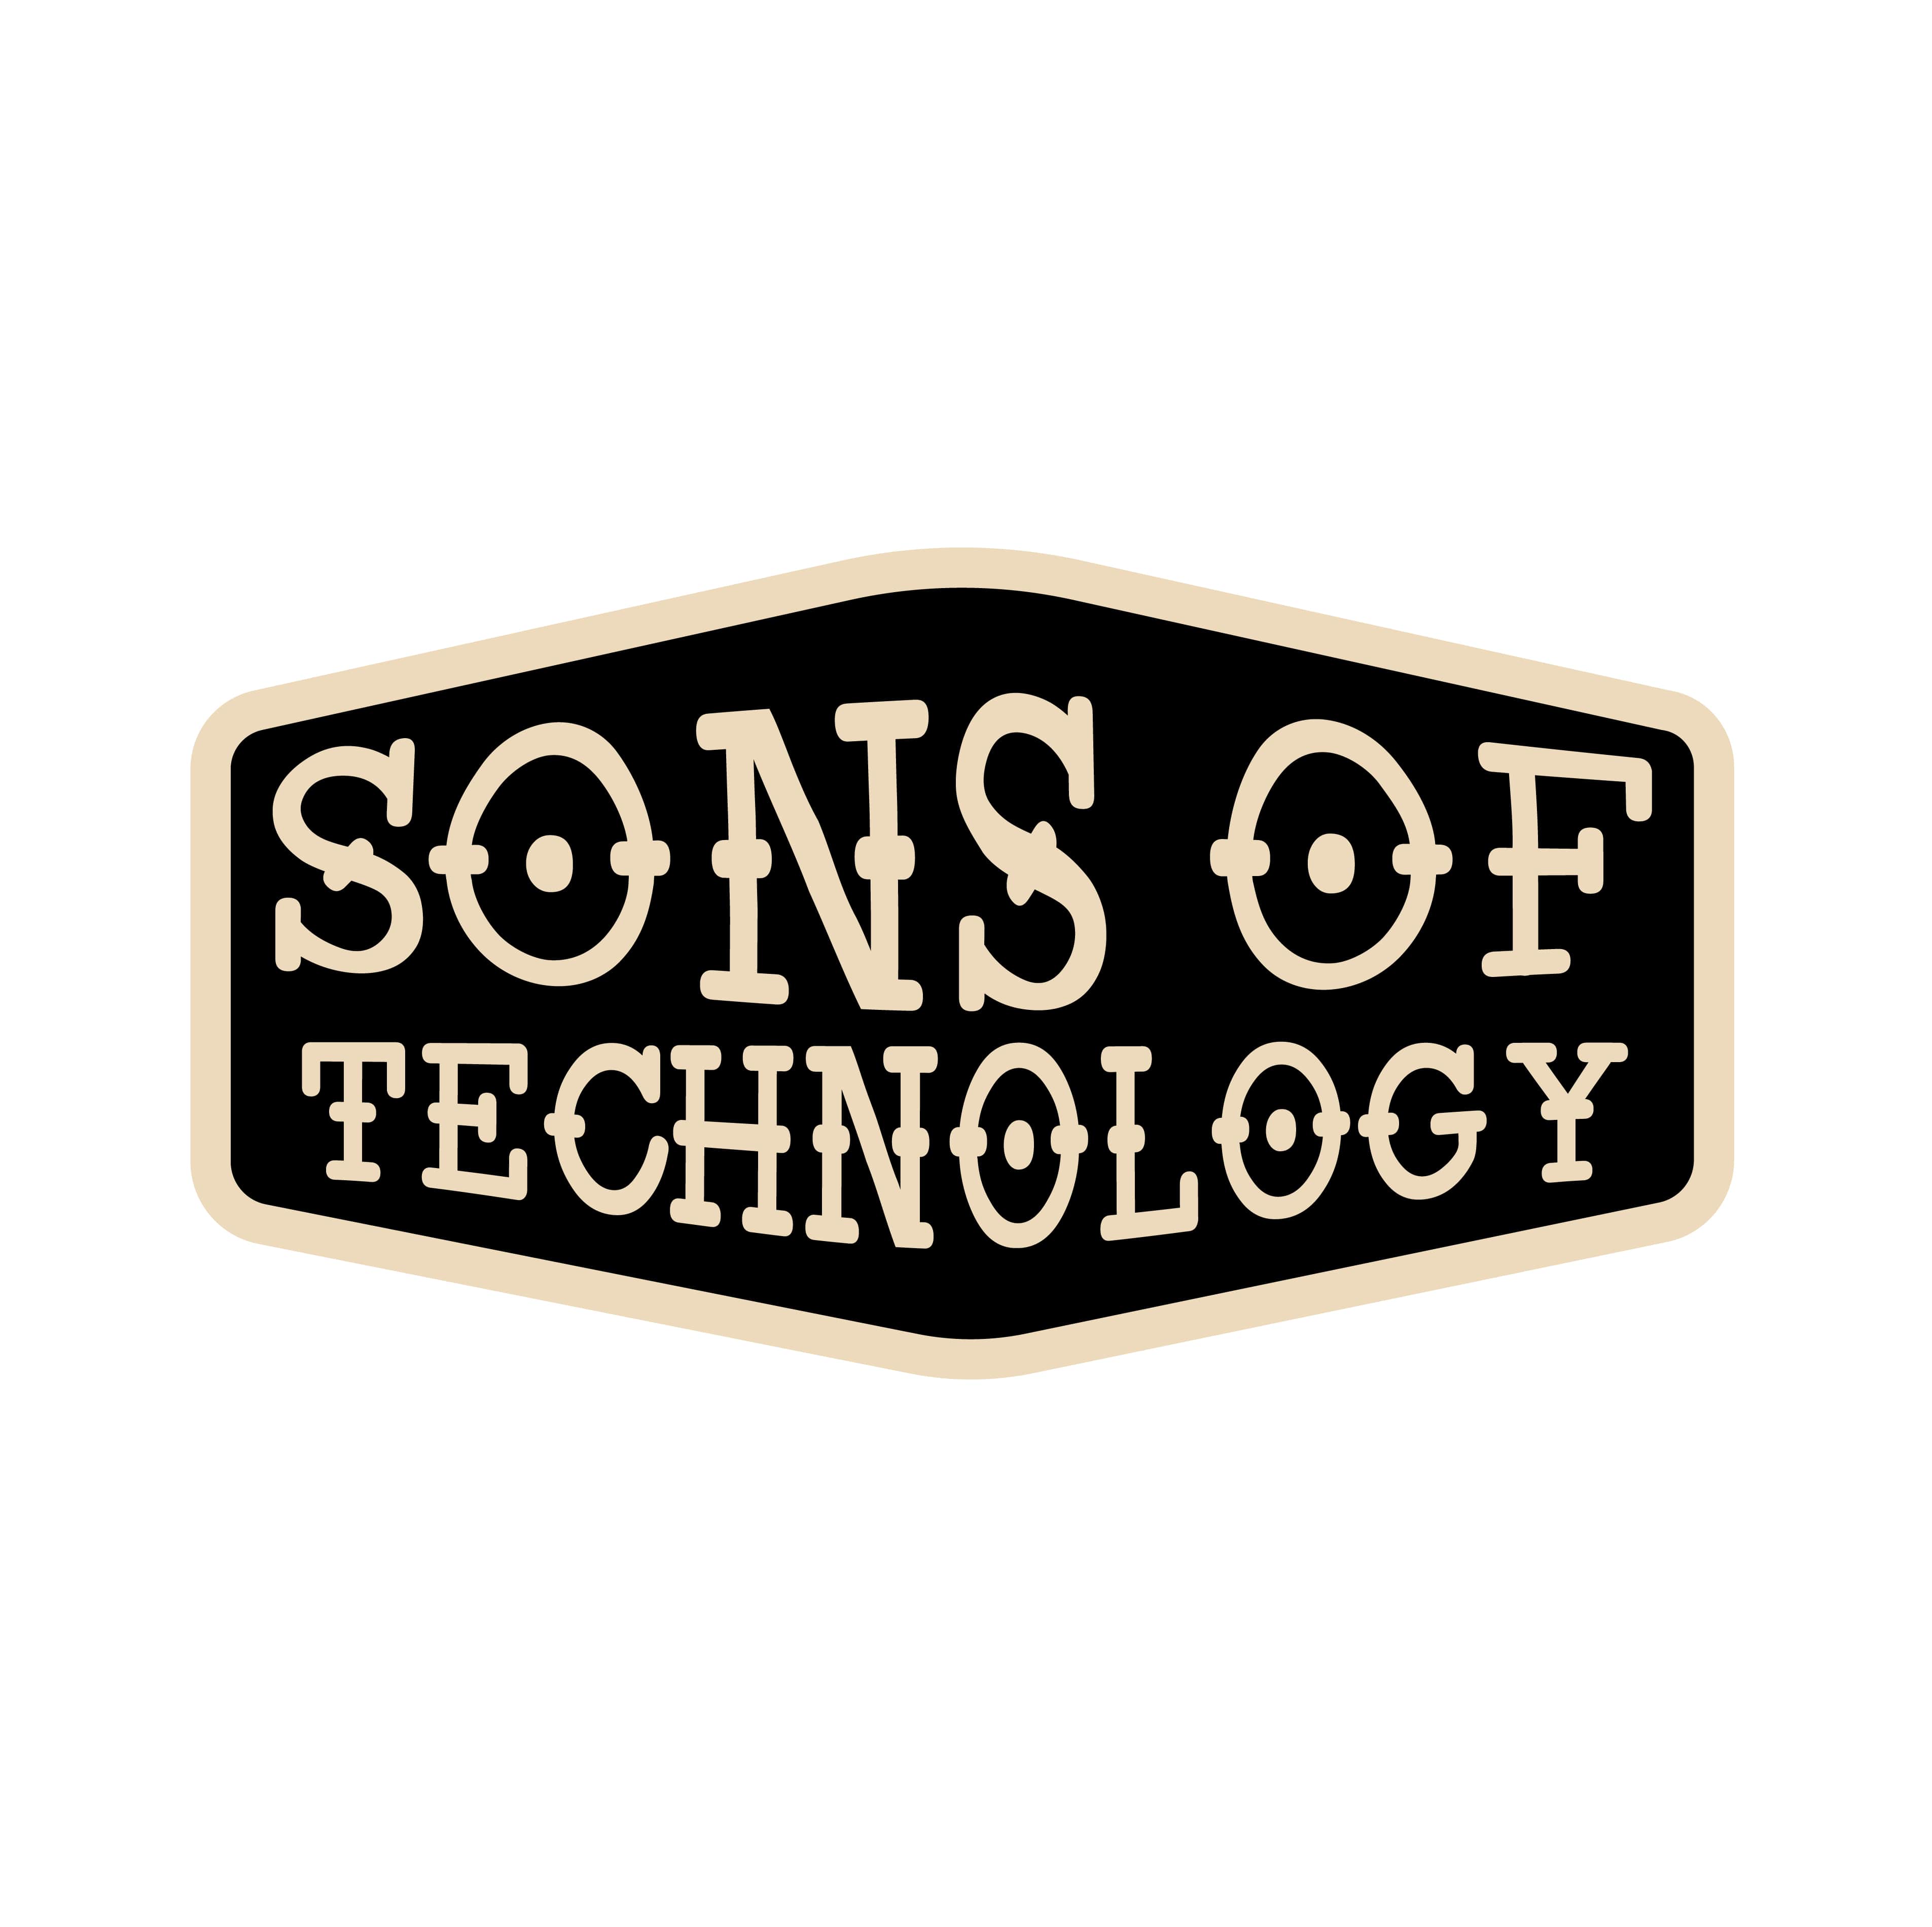 Sons of technology logo